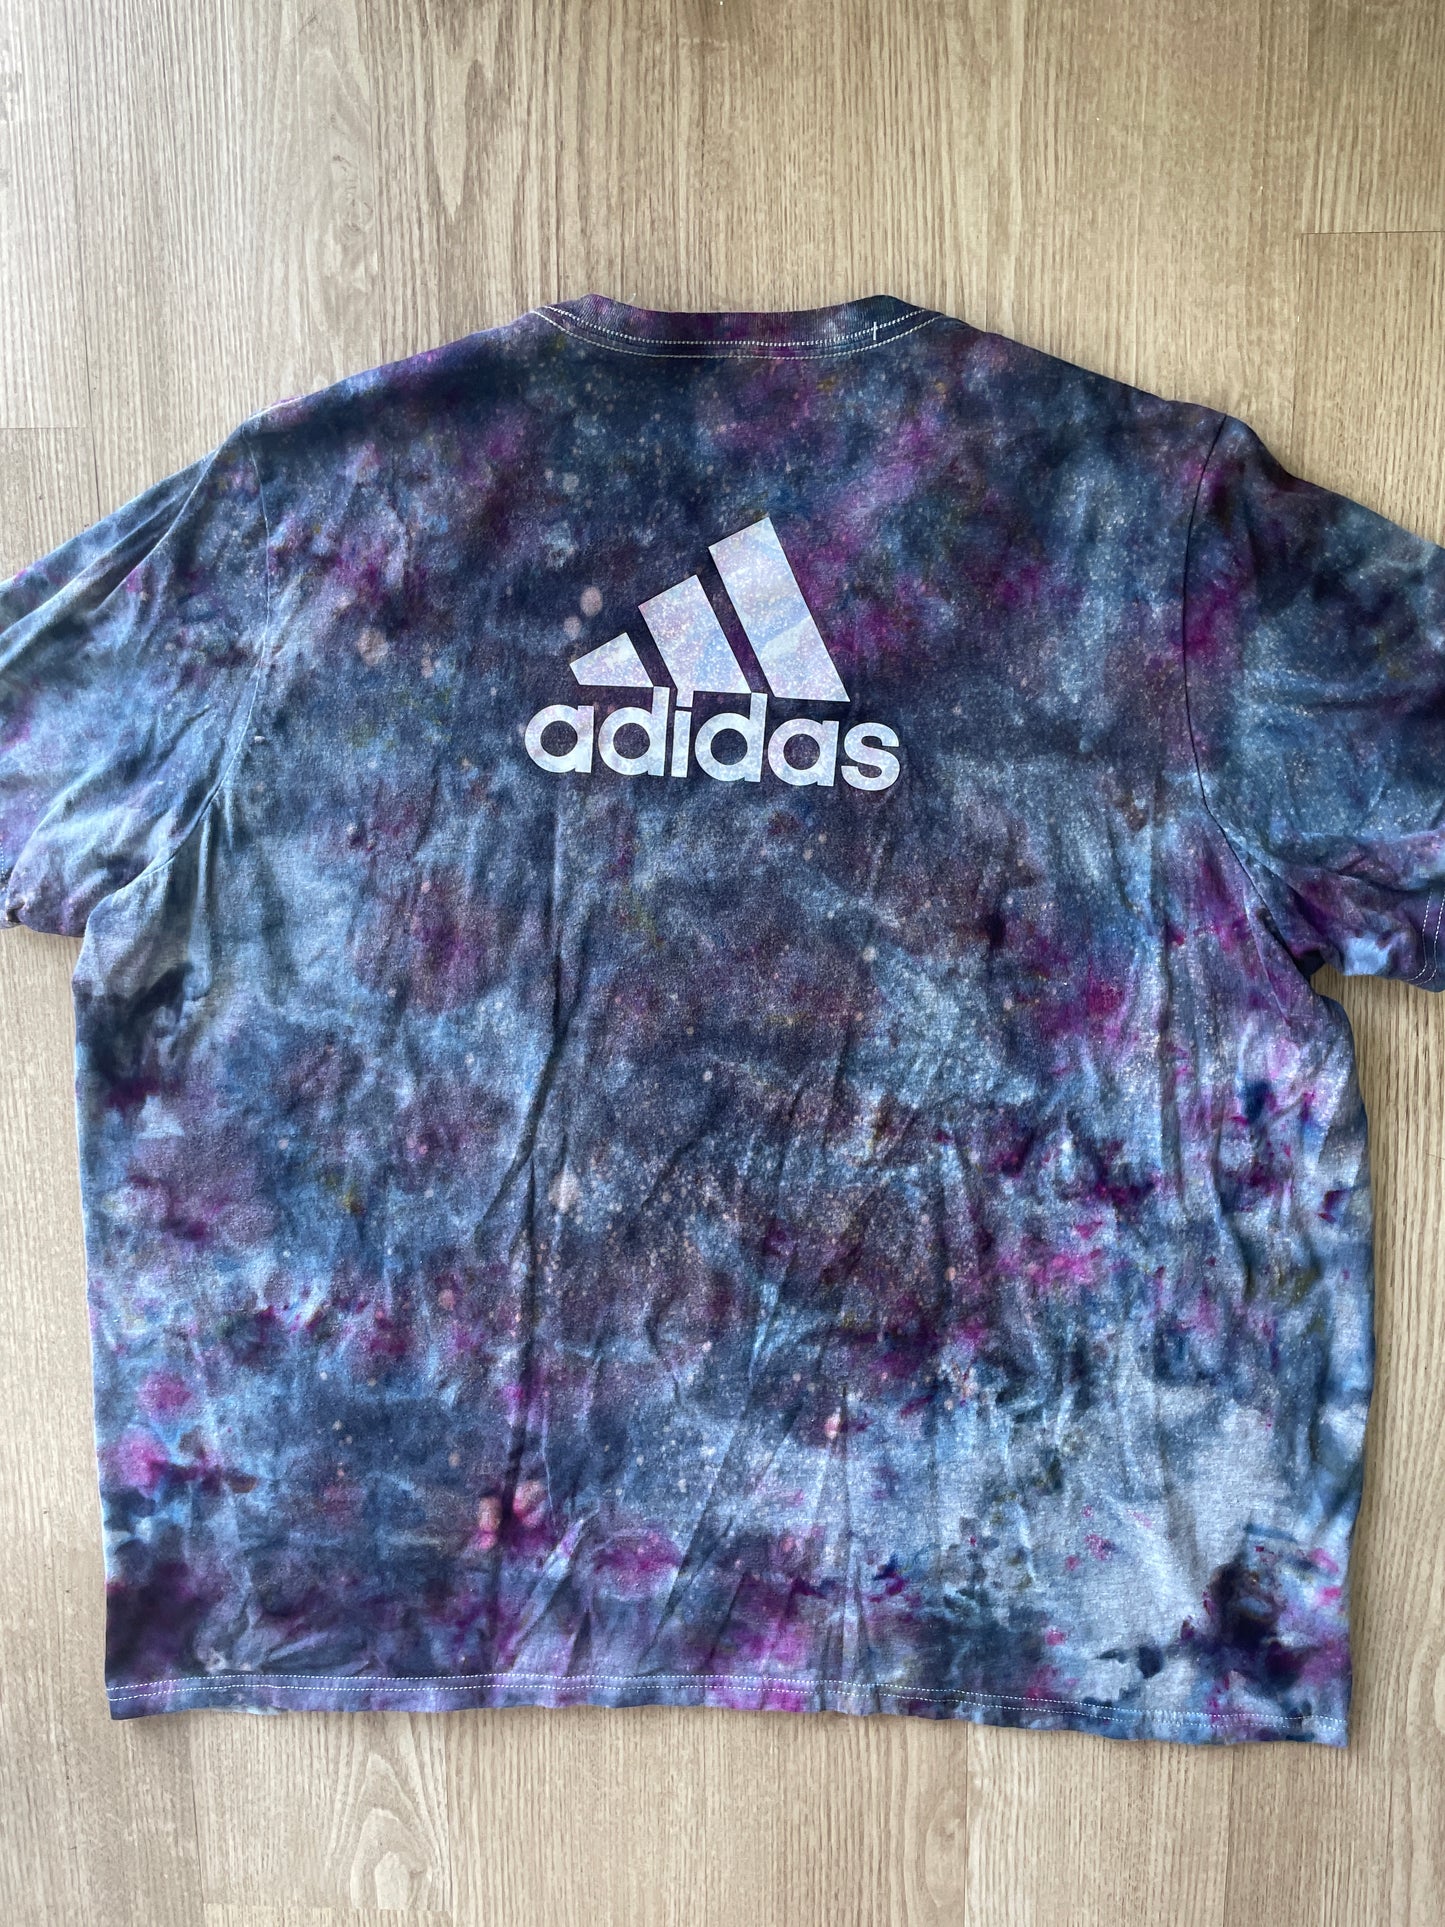 3XL Men’s adidas Tie Dye T-Shirt | One-Of-a-Kind Gray and Black Ice Dye Short Sleeve